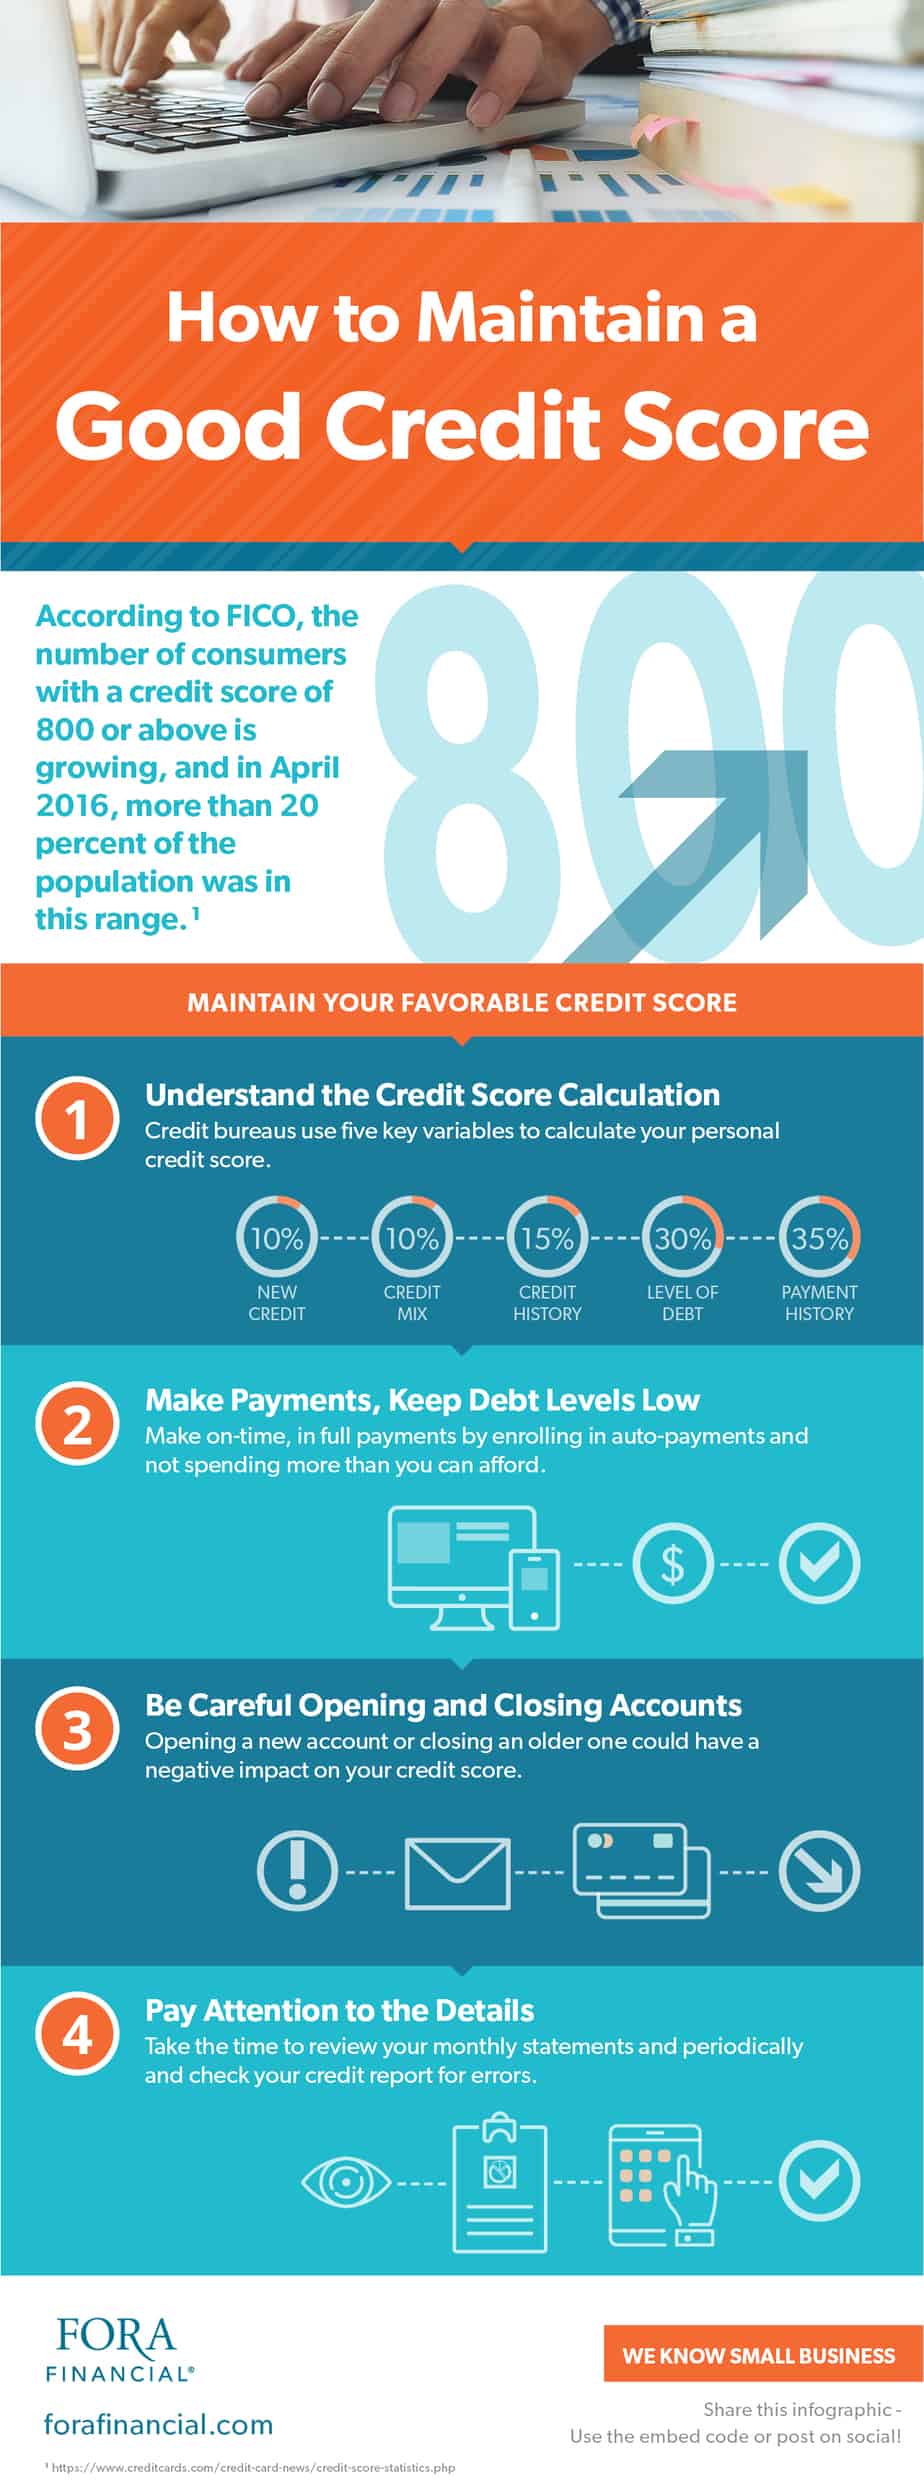 How to Maintain a Good Credit Score (1)